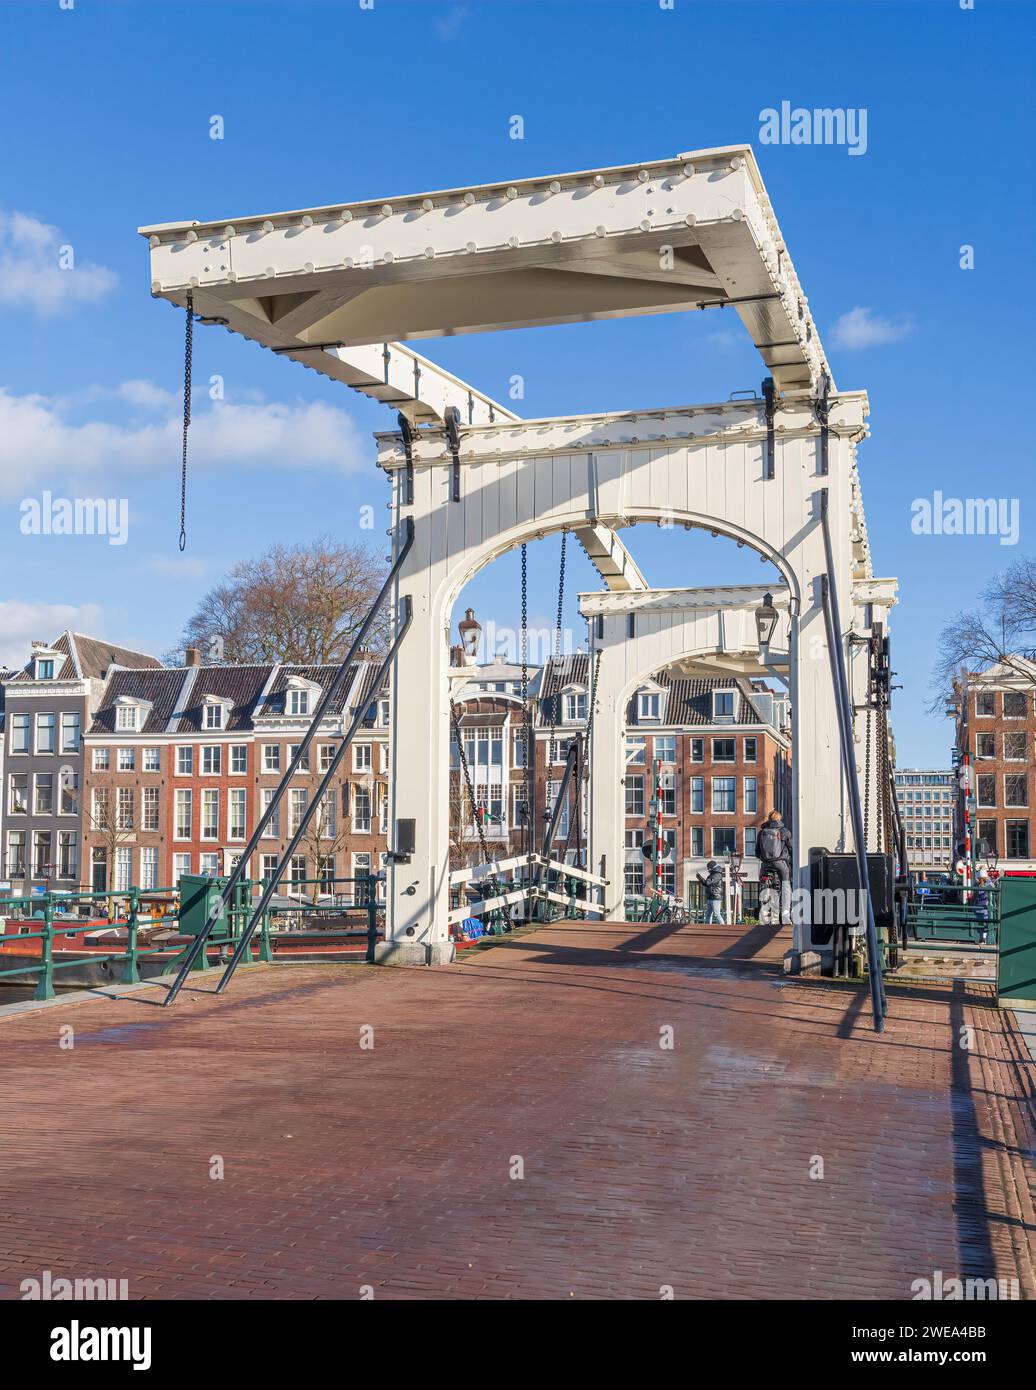 Magere Brug or Skinny Bridge across the Amstel river in Amsterdam the Netherlands Stock Photo